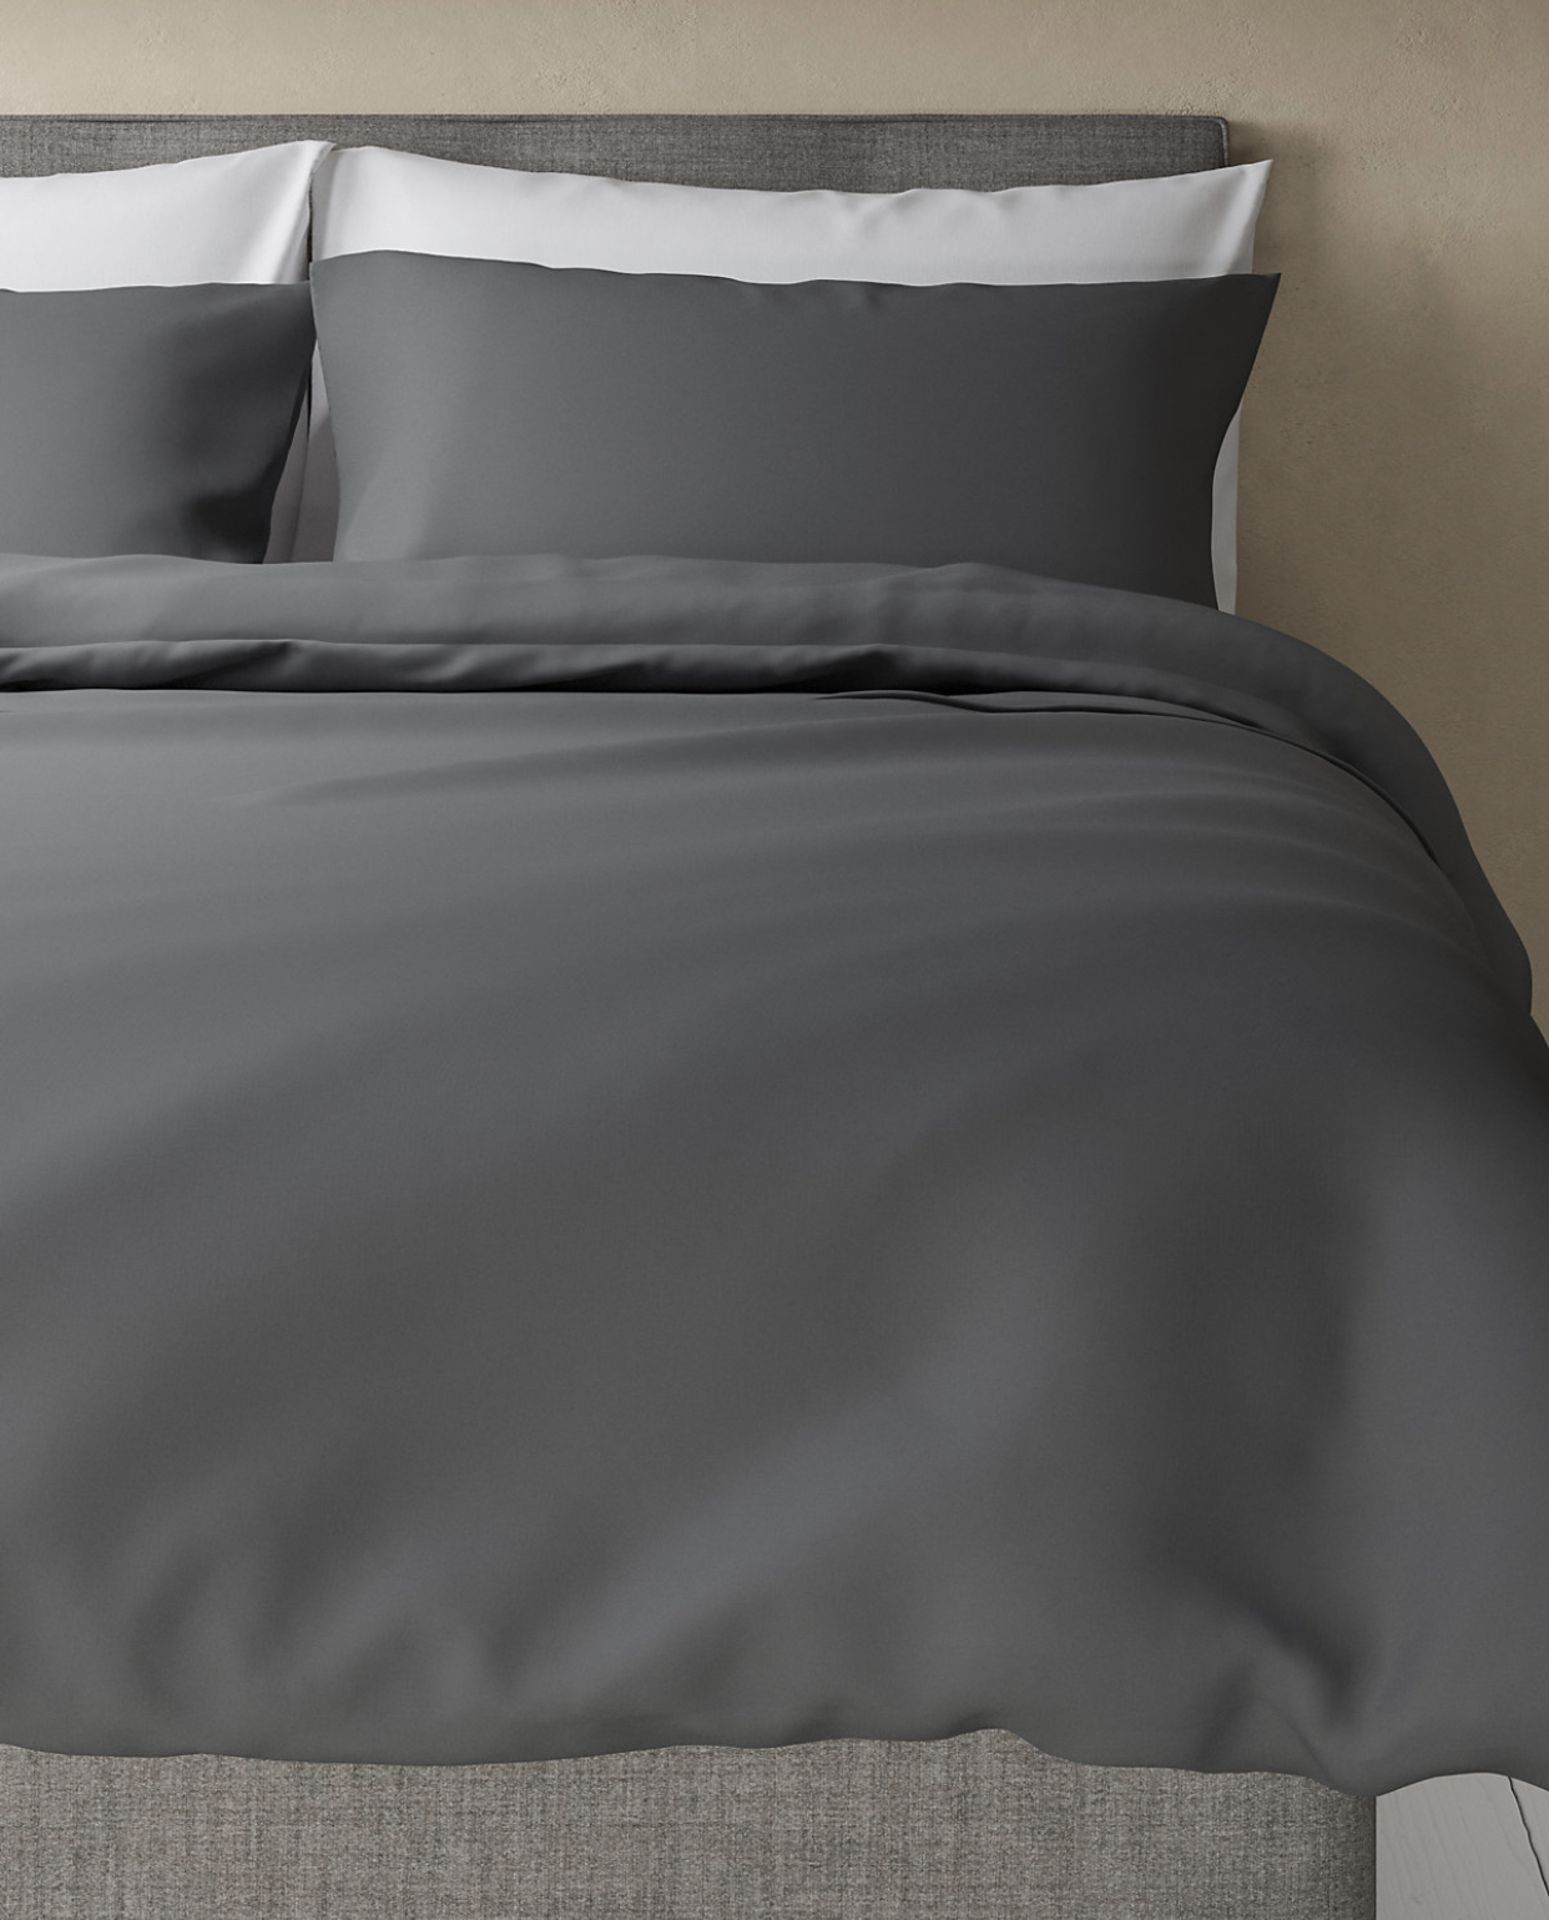 Egyptian Cotton 230 Thread Count Duvet Cover, King Size RRP £49.50